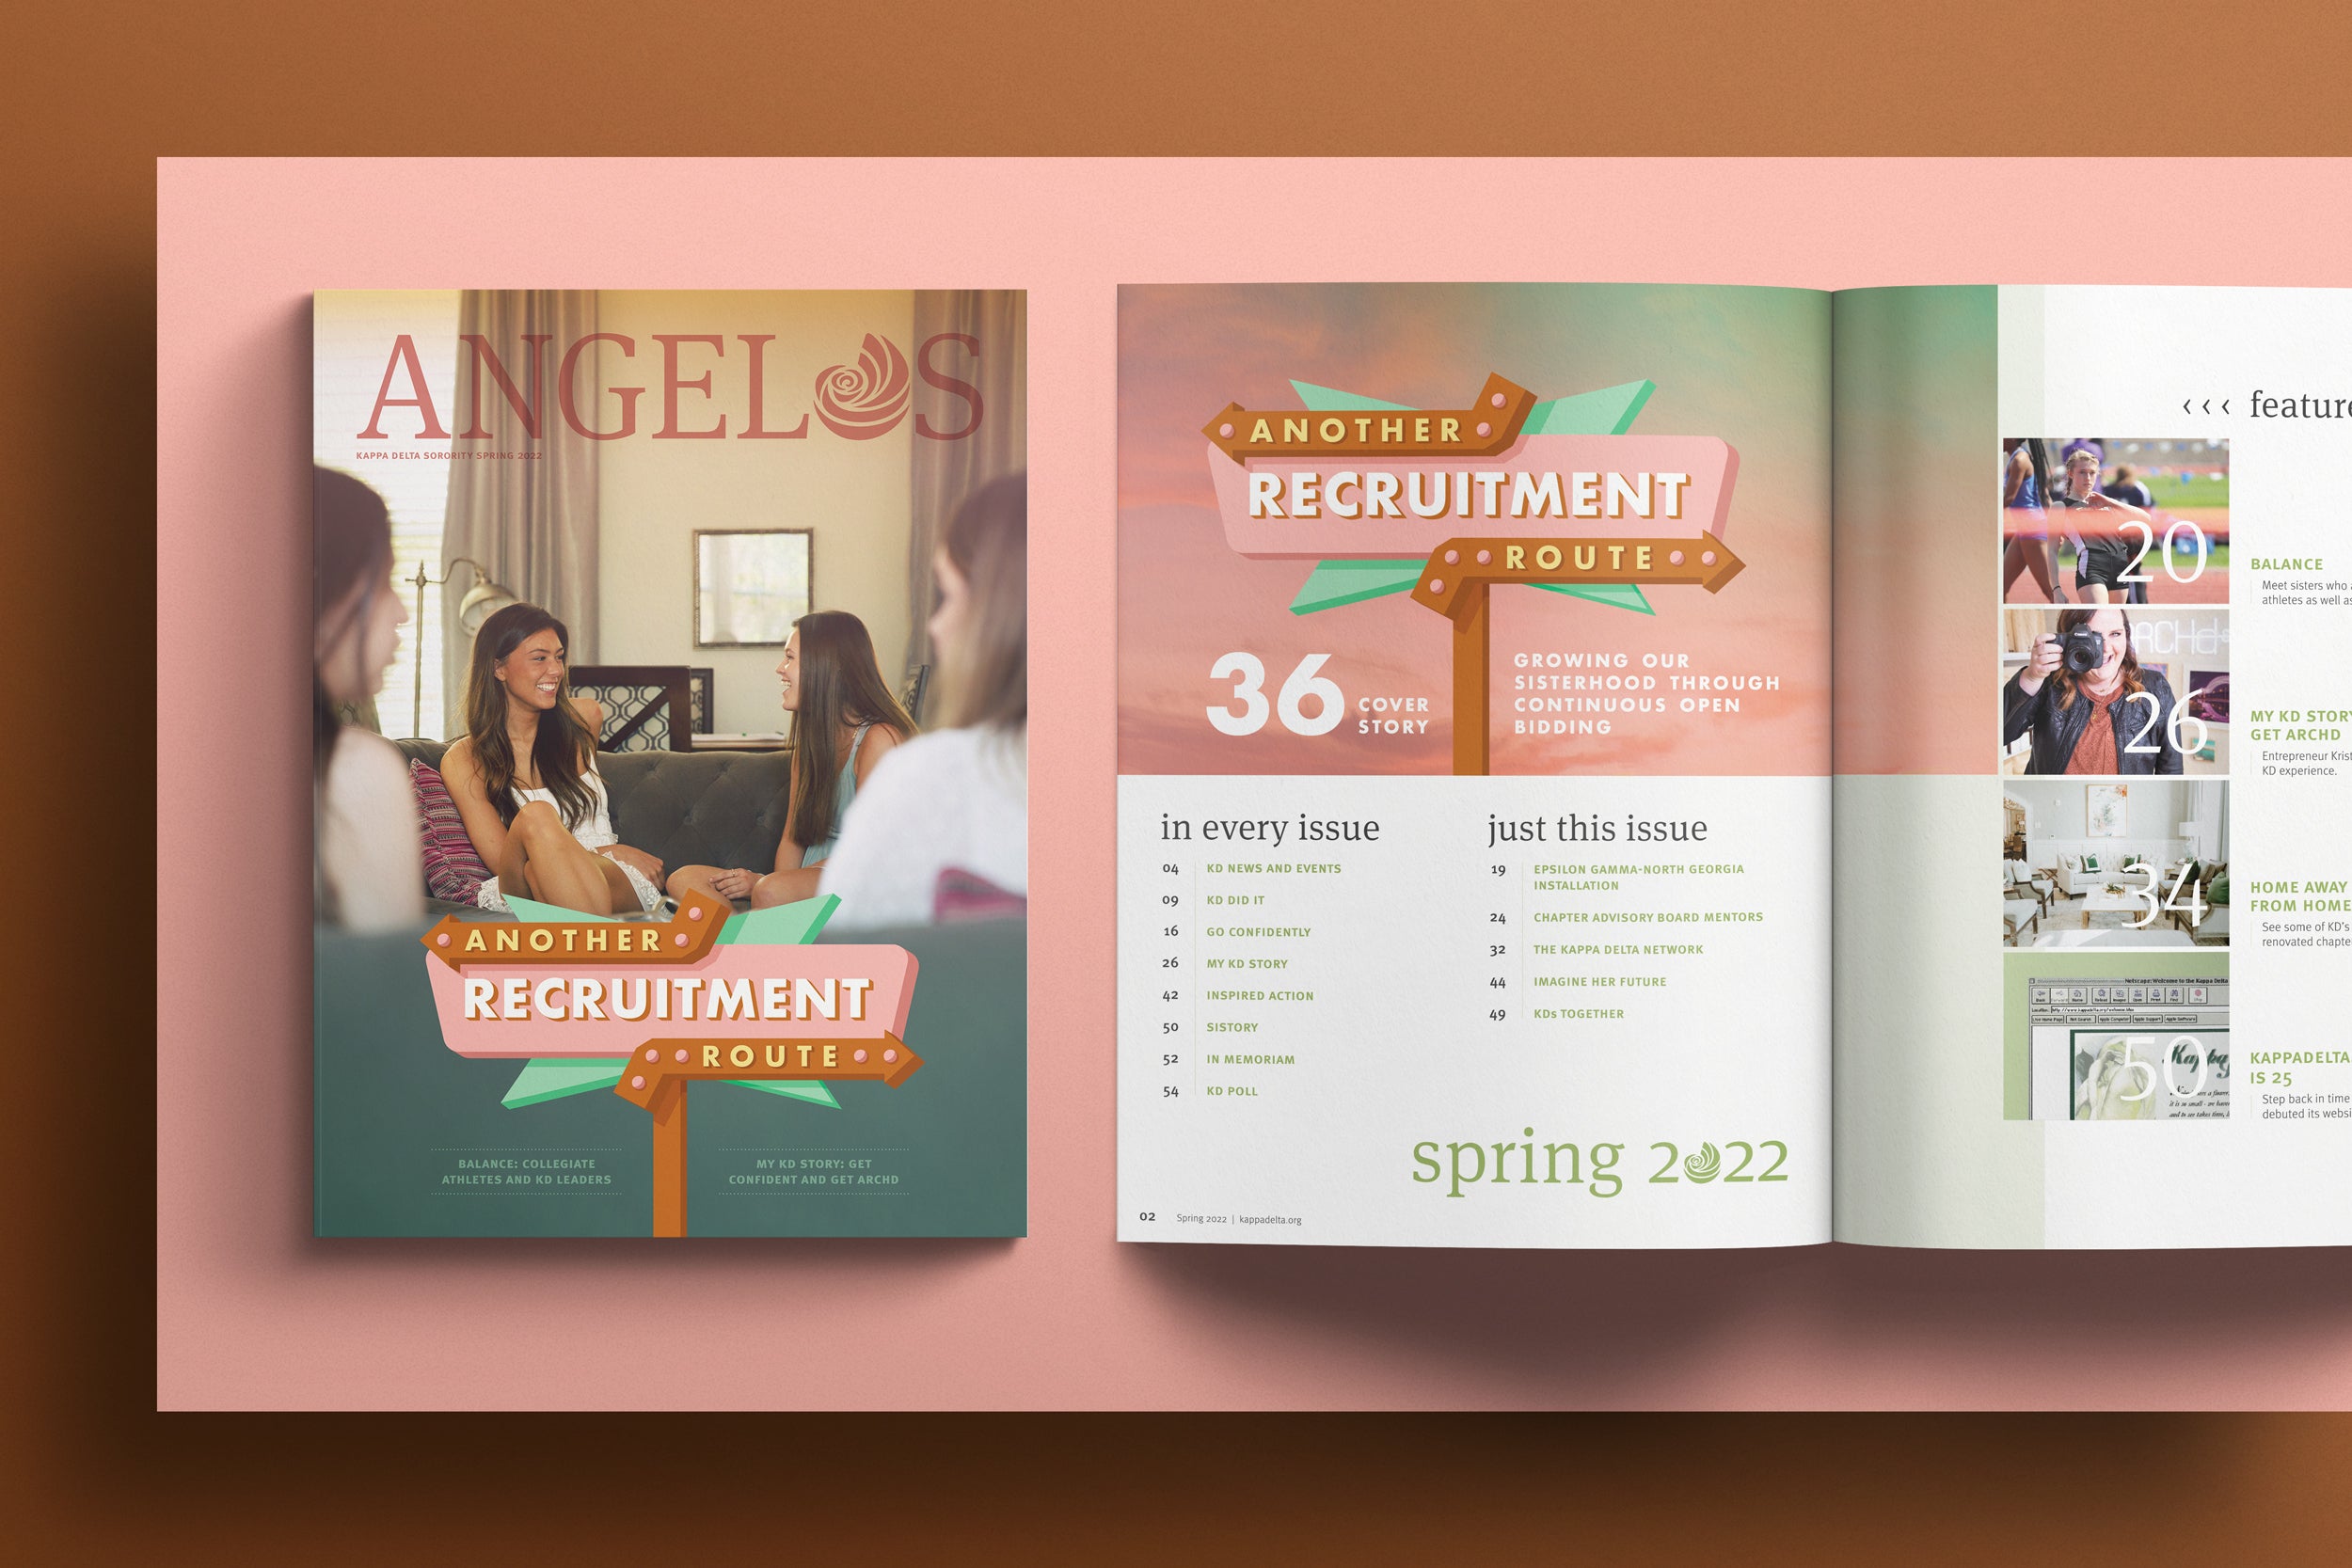 Magazine cover design and Table of Contents article layout for the spring issue of The Angelos